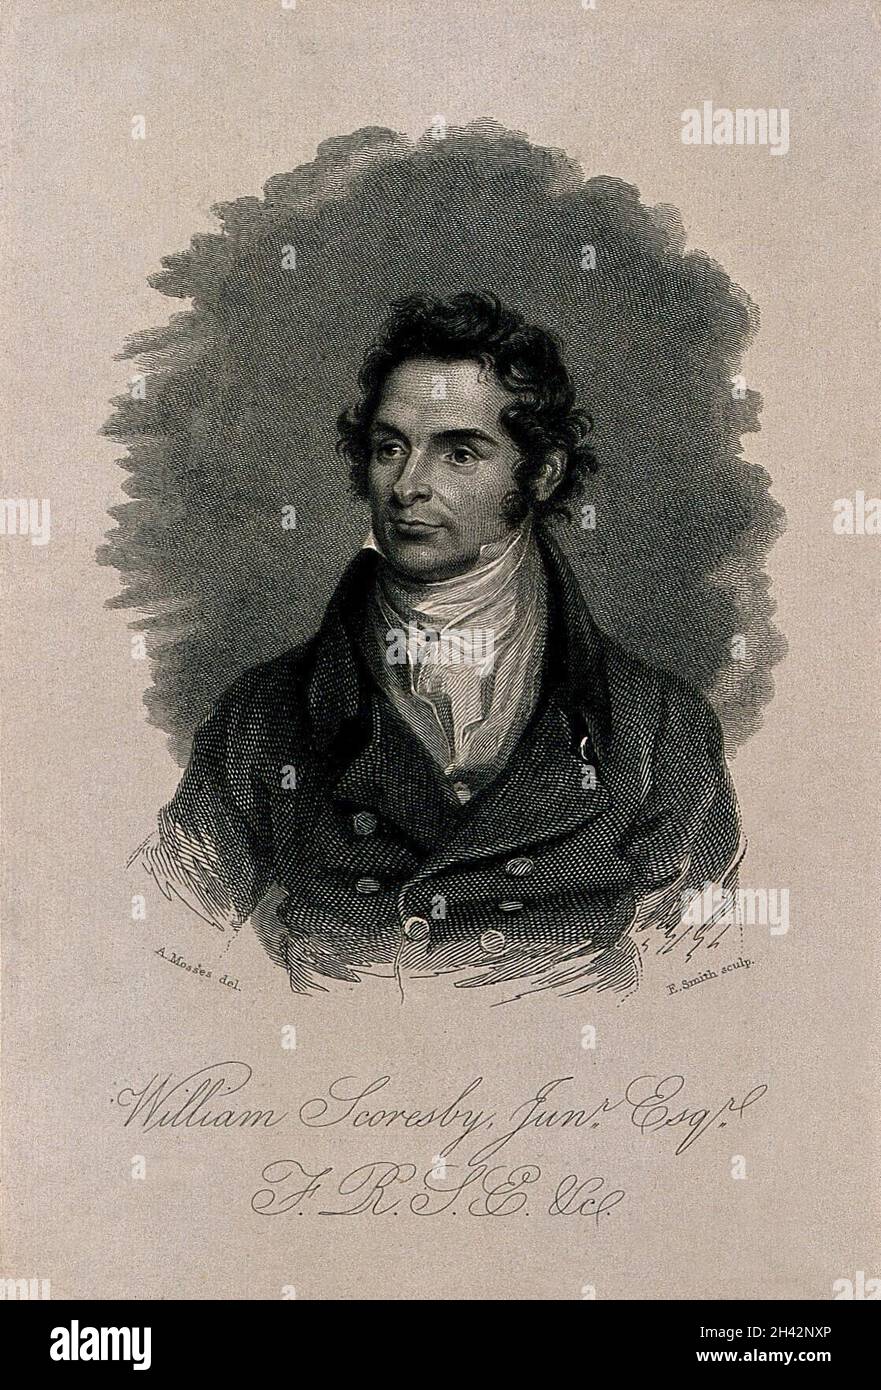 William Scoresby. Line engraving by E. Smith, 1821 after A. Mosses. Stock Photo